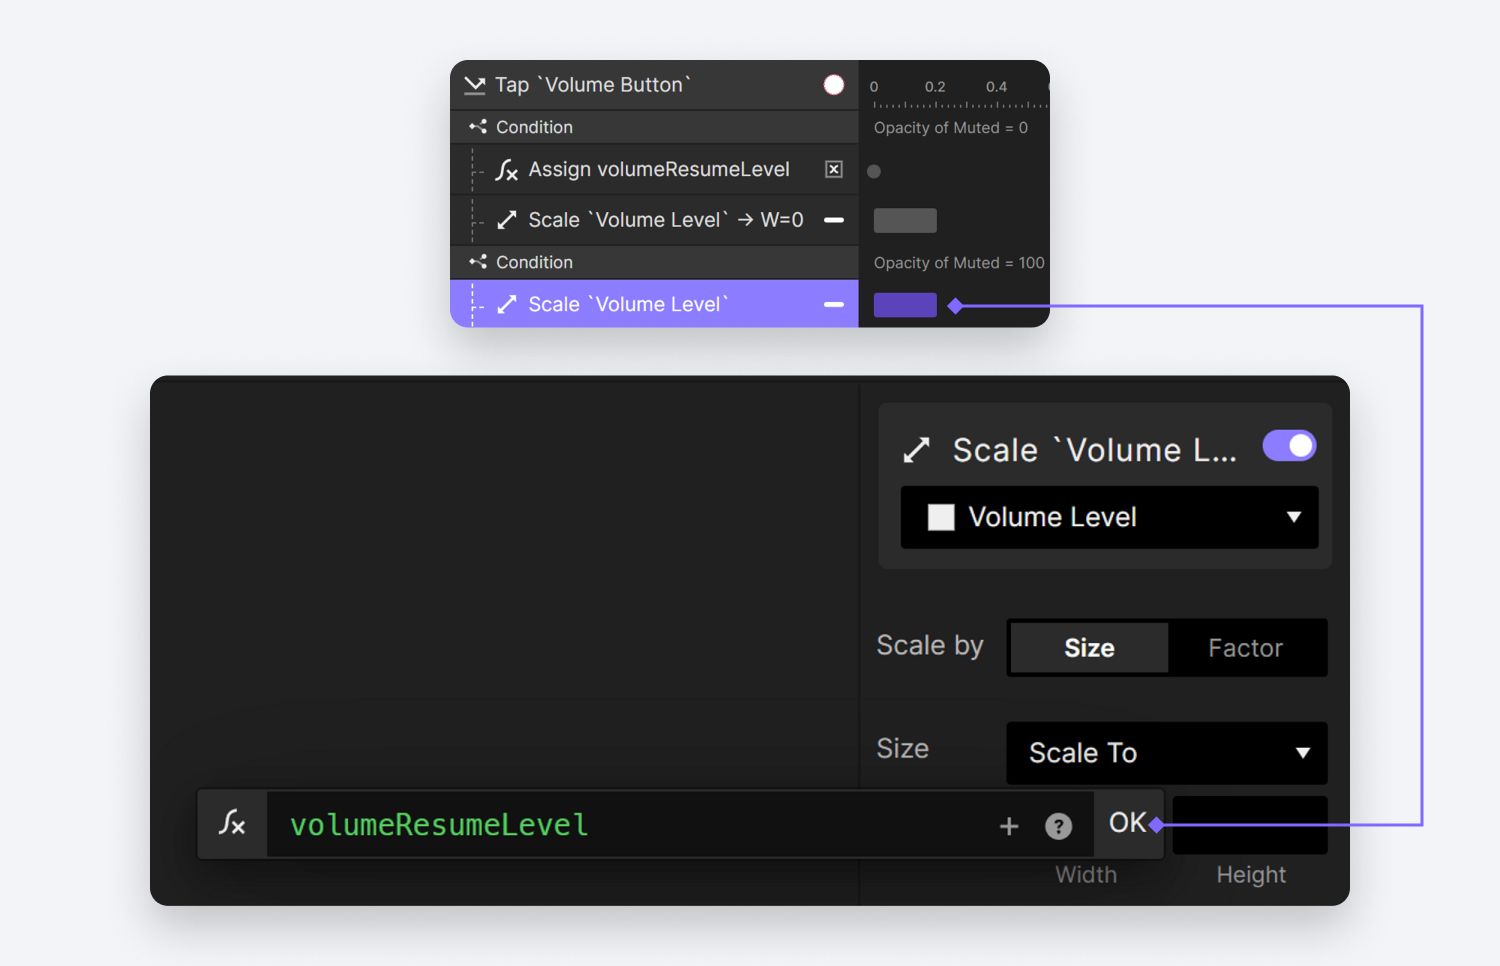 Implement a Scale action on the Volume Level layer.